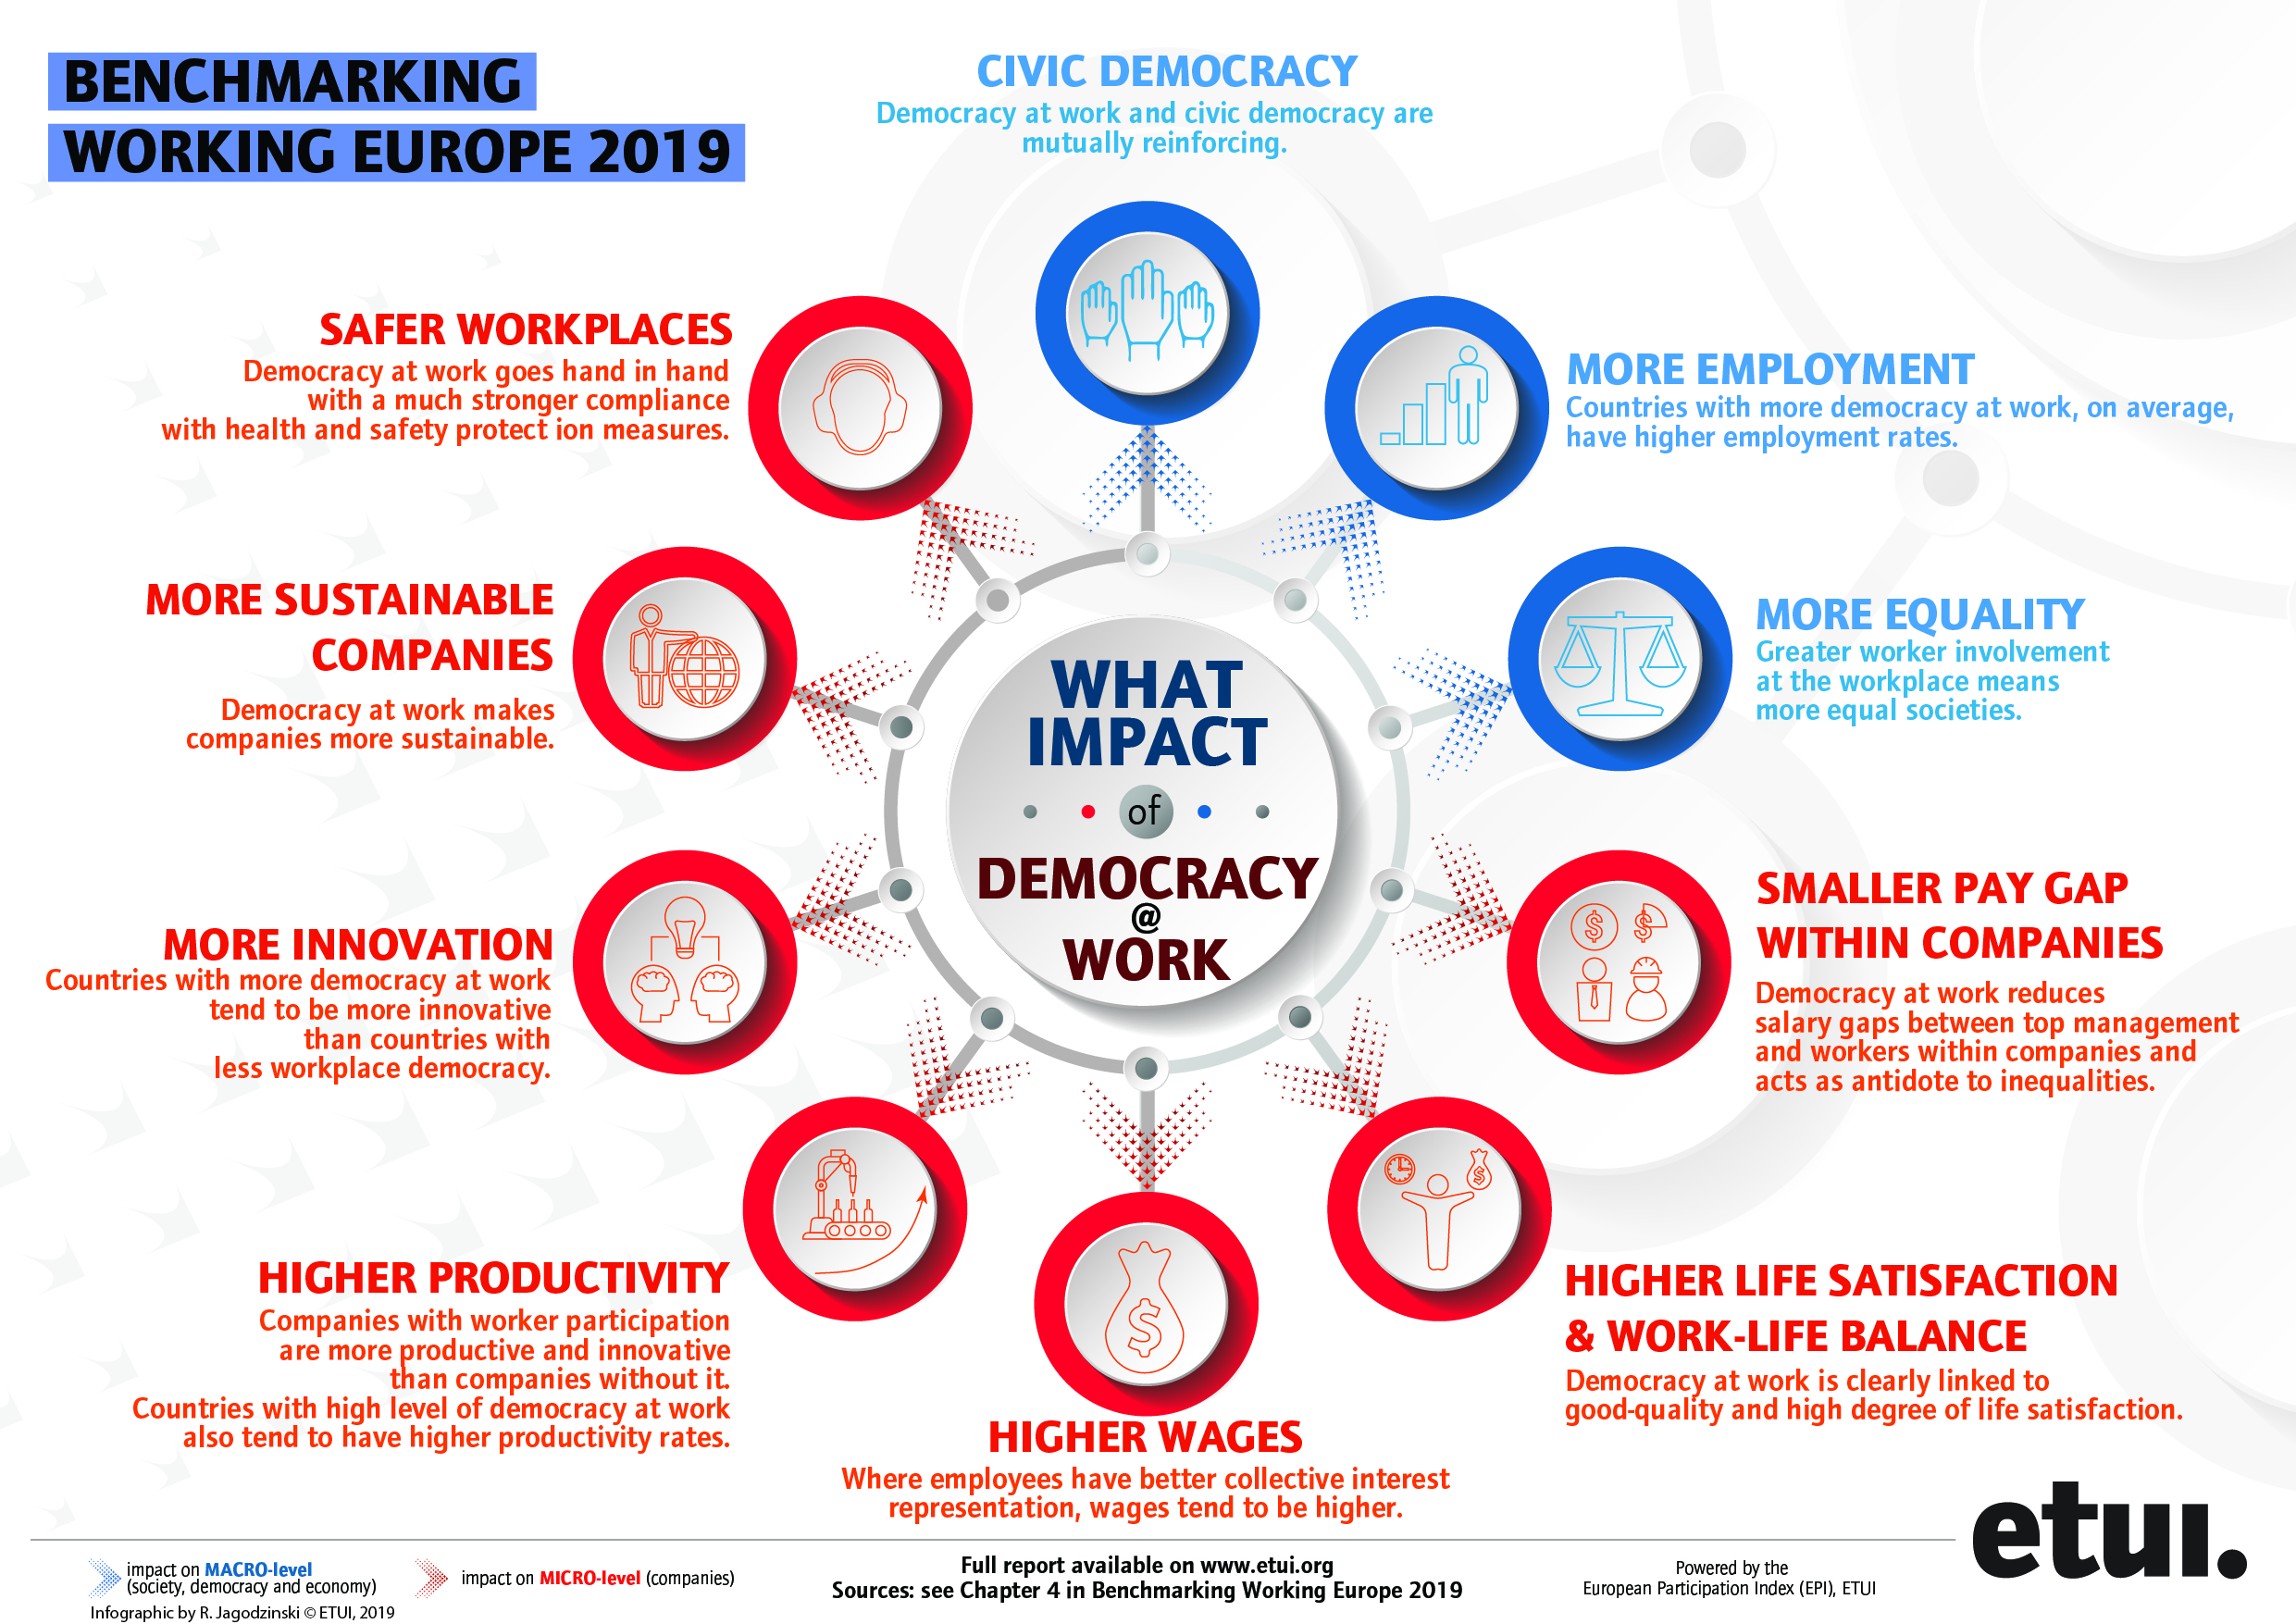 An infographic showing the impact of democracy of work (author: Romuald Jagodziński)